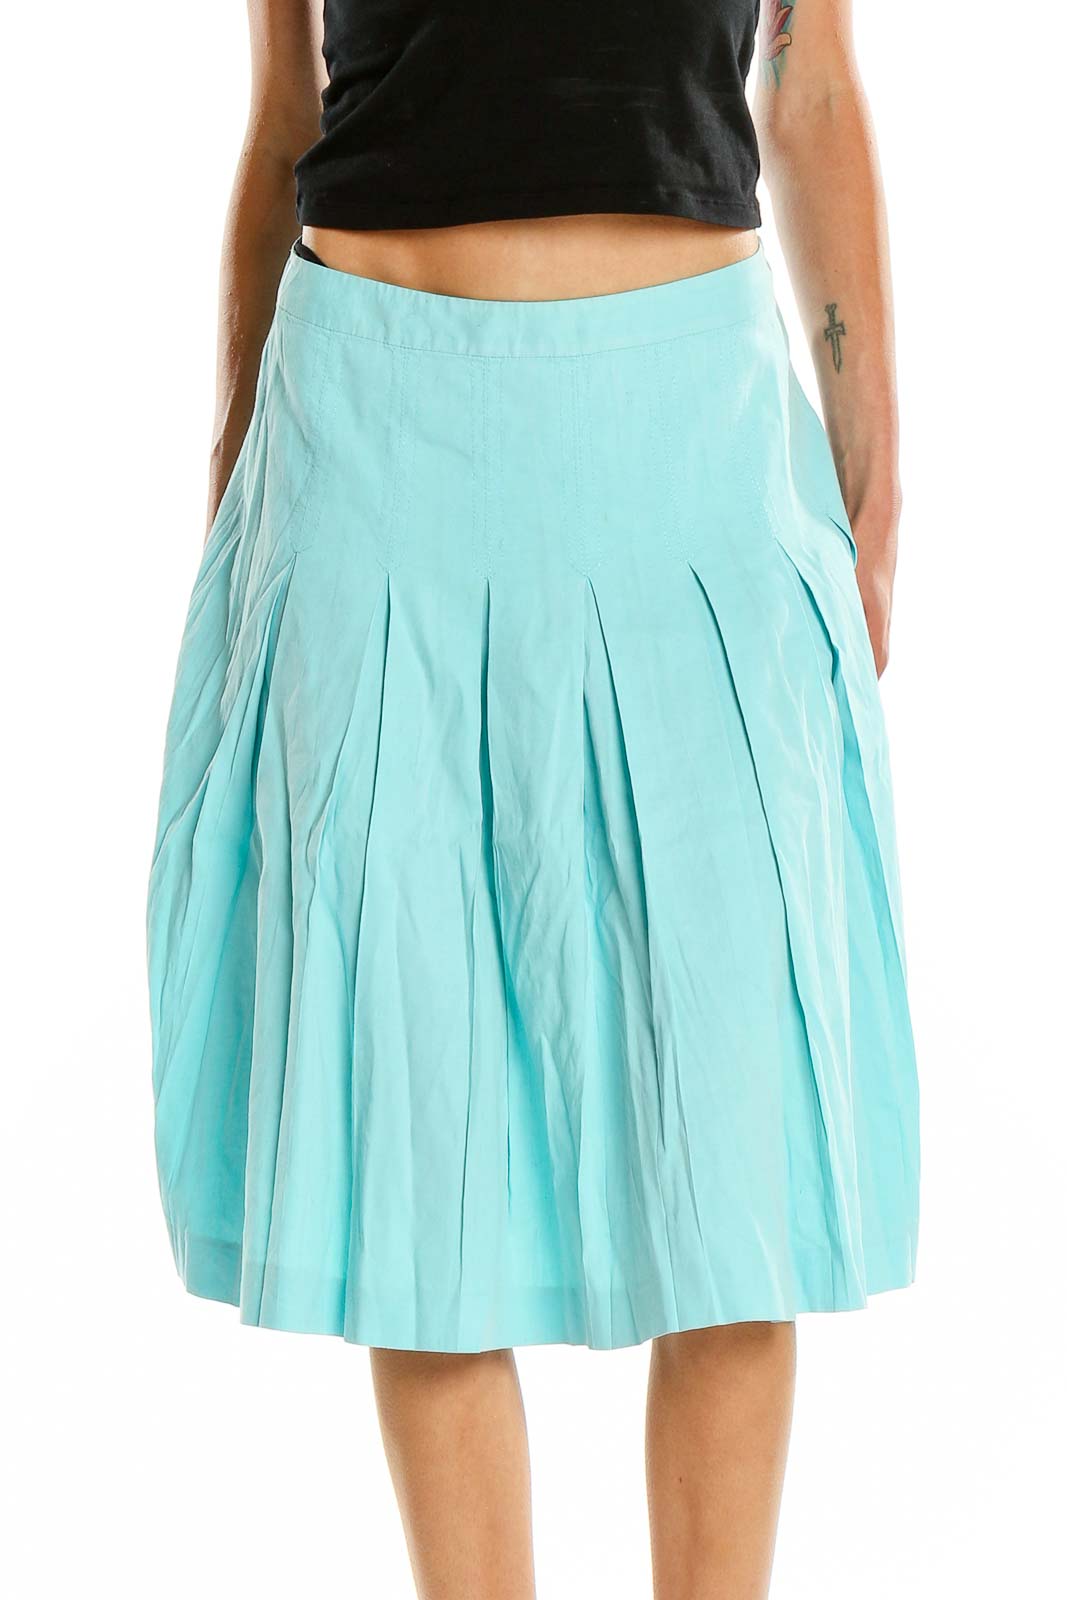 Blue Chic Pleated Skirt Front